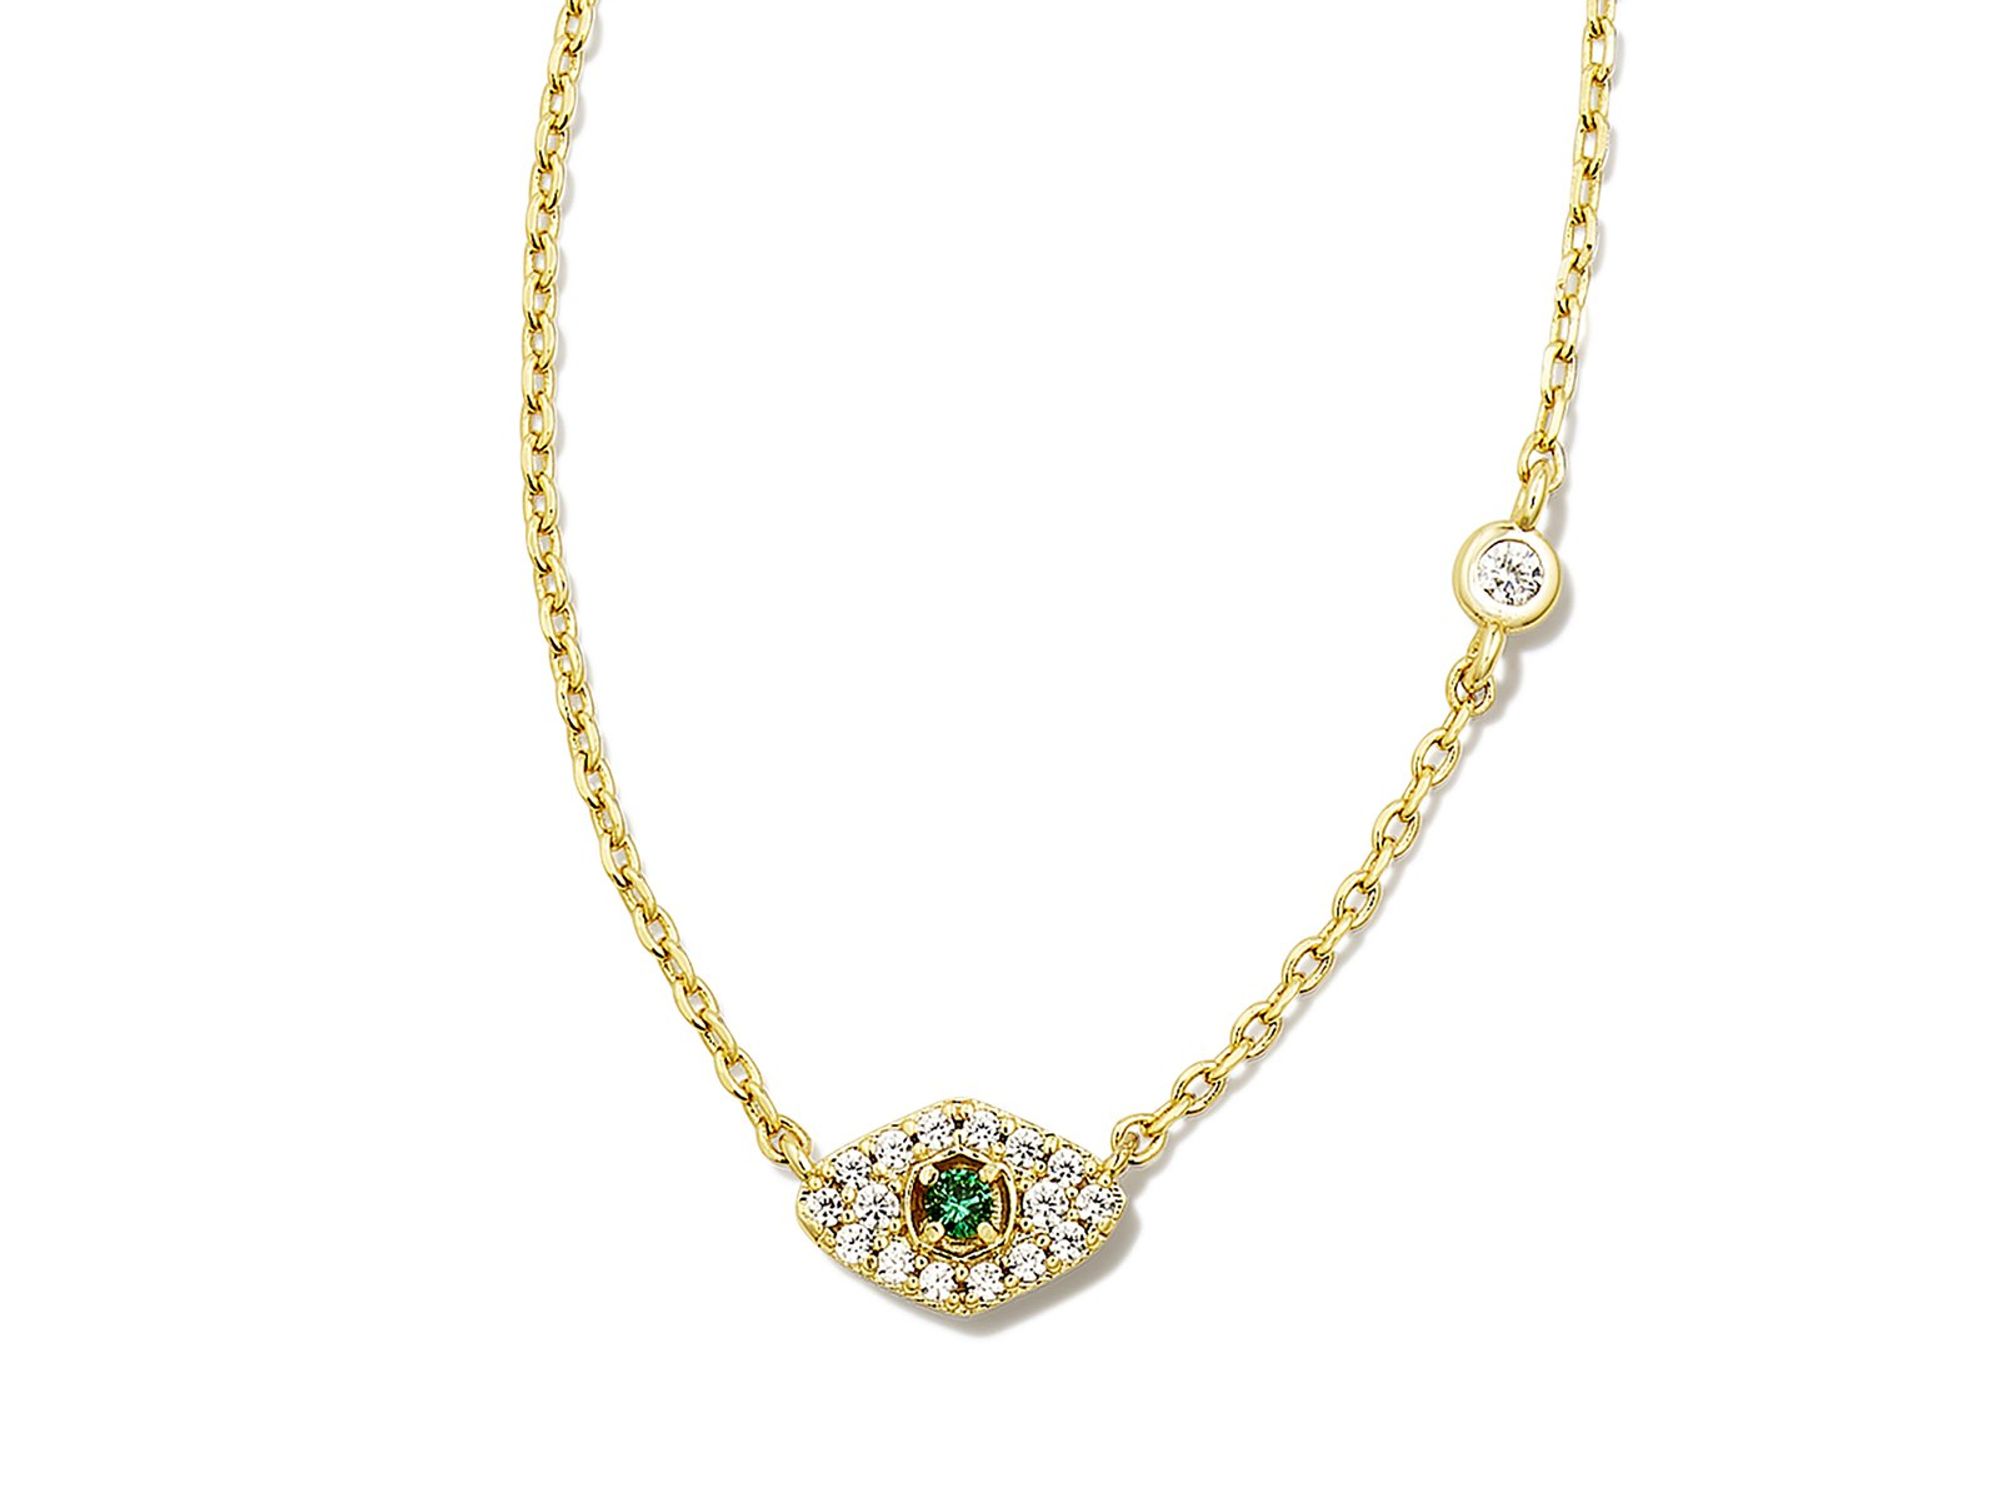 Kendra Scott x Nasreen Shahi from @heynasreen collection necklace